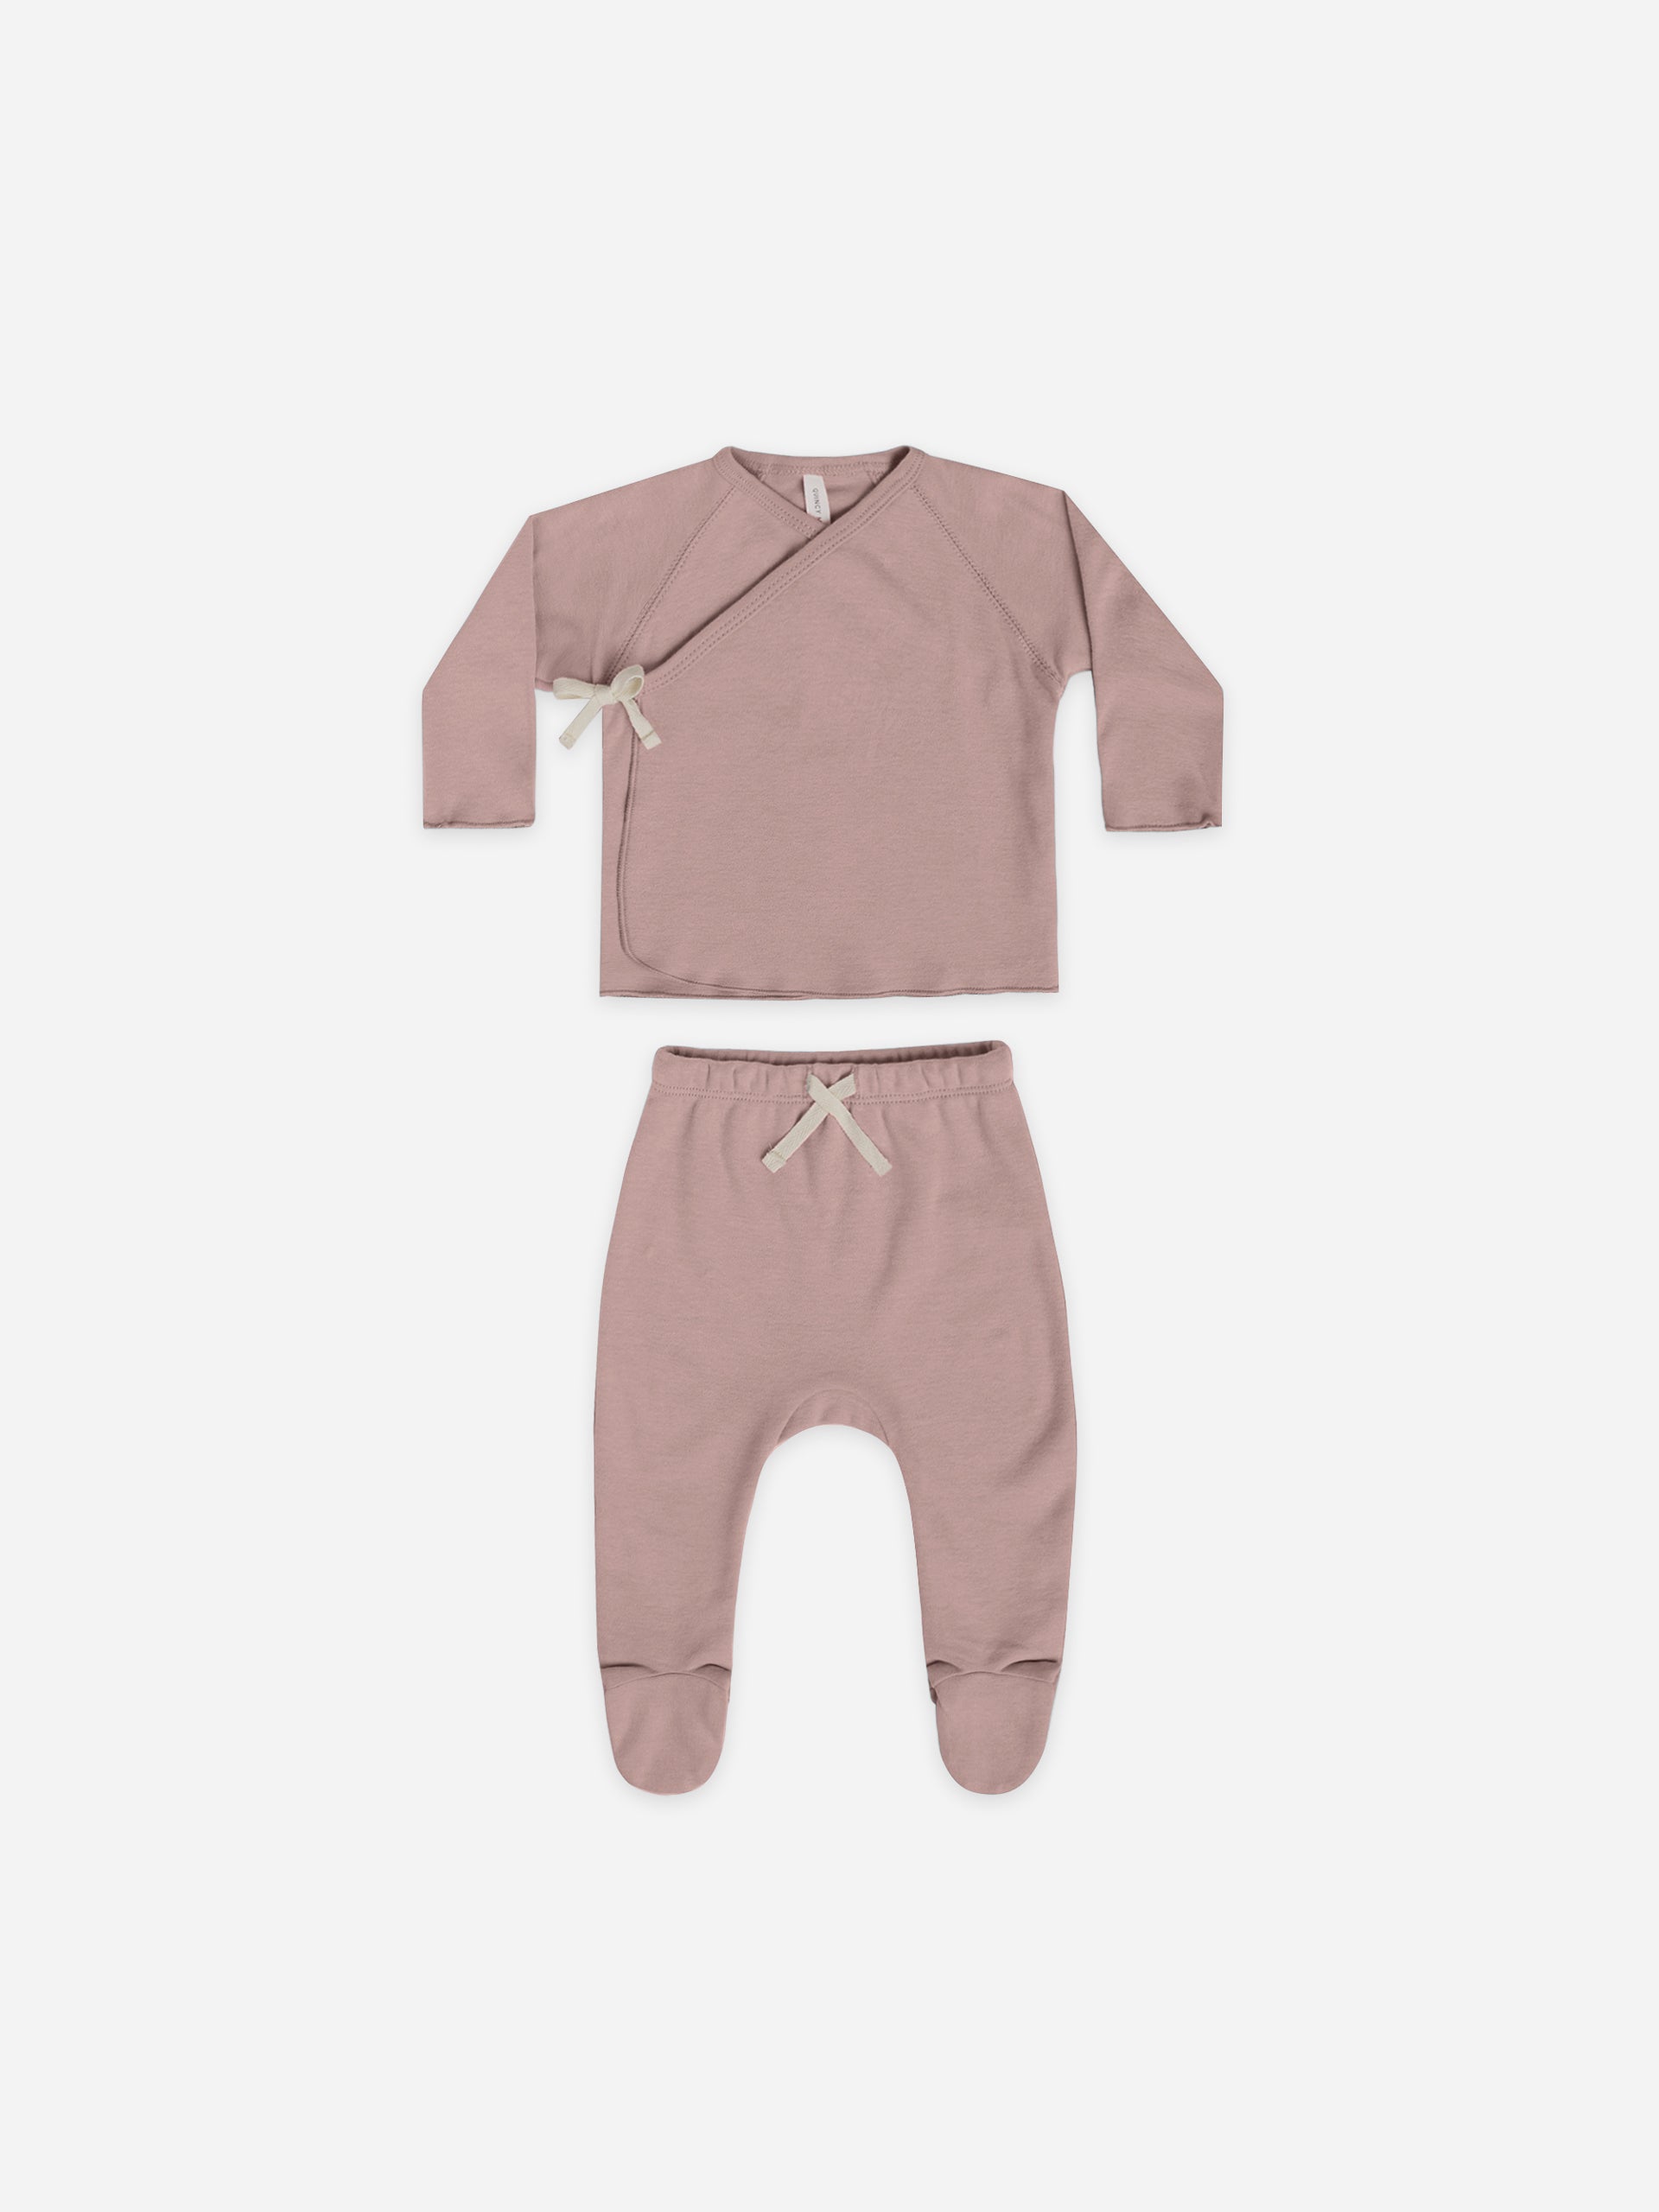 wrap top + pant set | lilac - Quincy Mae | Baby Basics | Baby Clothing | Organic Baby Clothes | Modern Baby Boy Clothes |